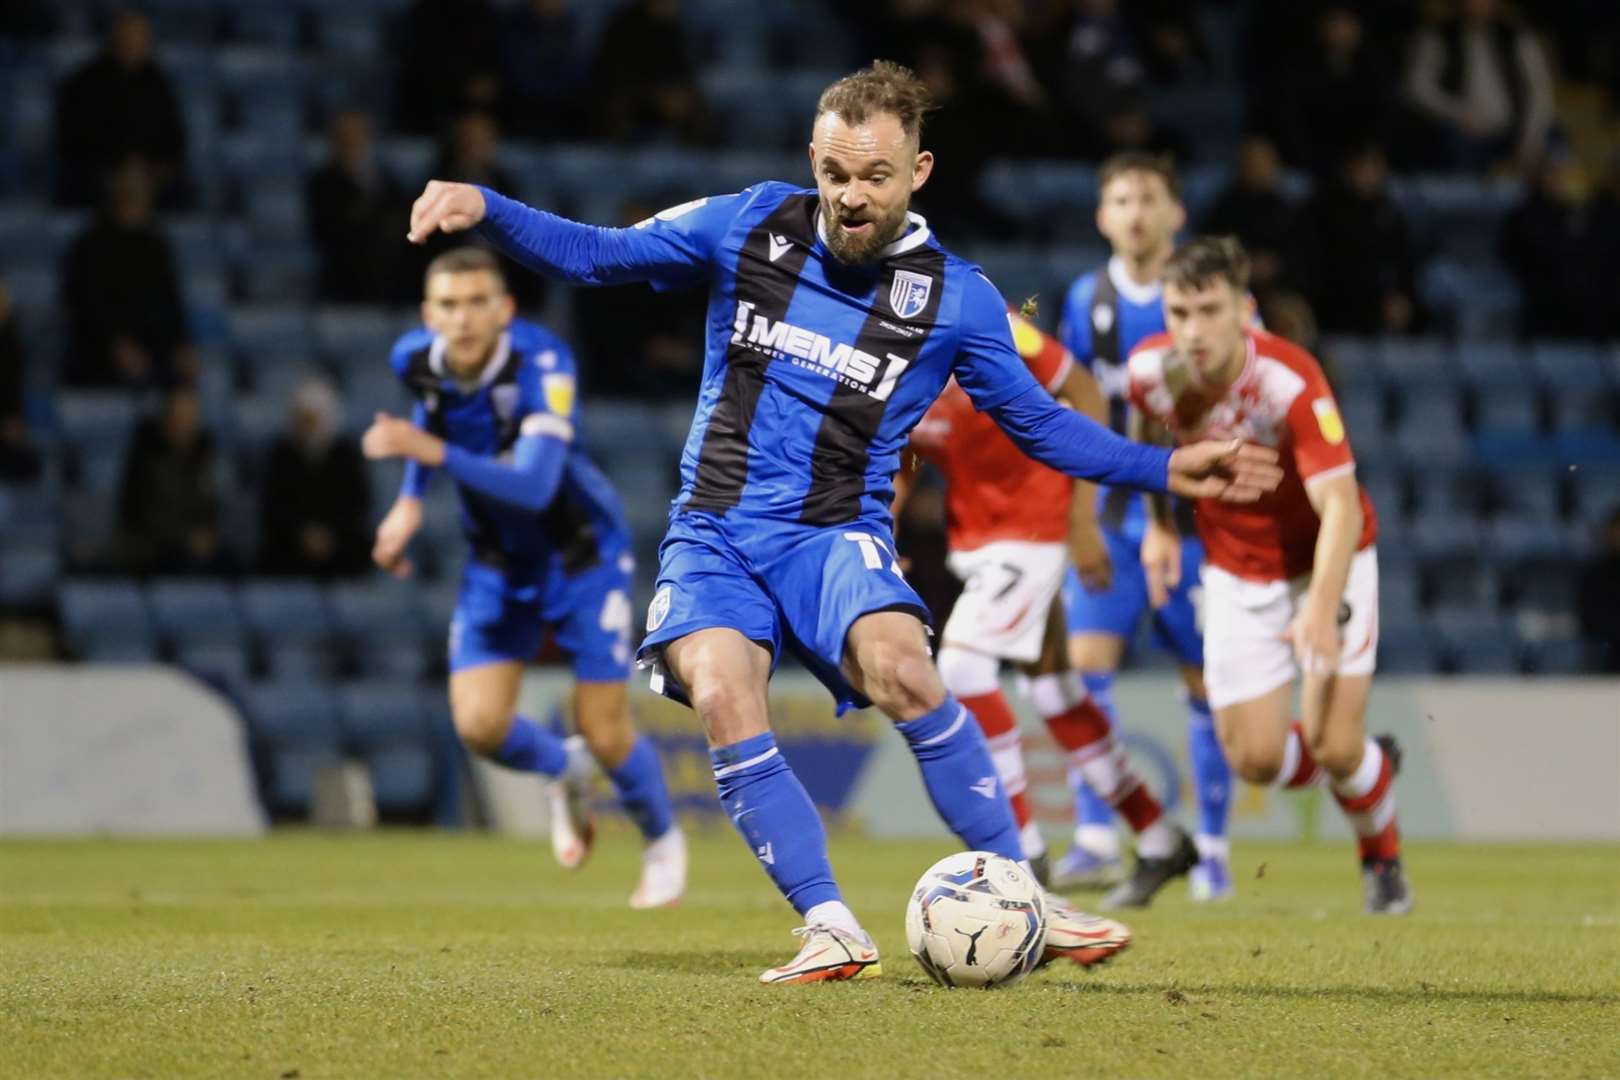 Danny Lloyd puts Gillingham ahead from the penalty spot Picture: KPI